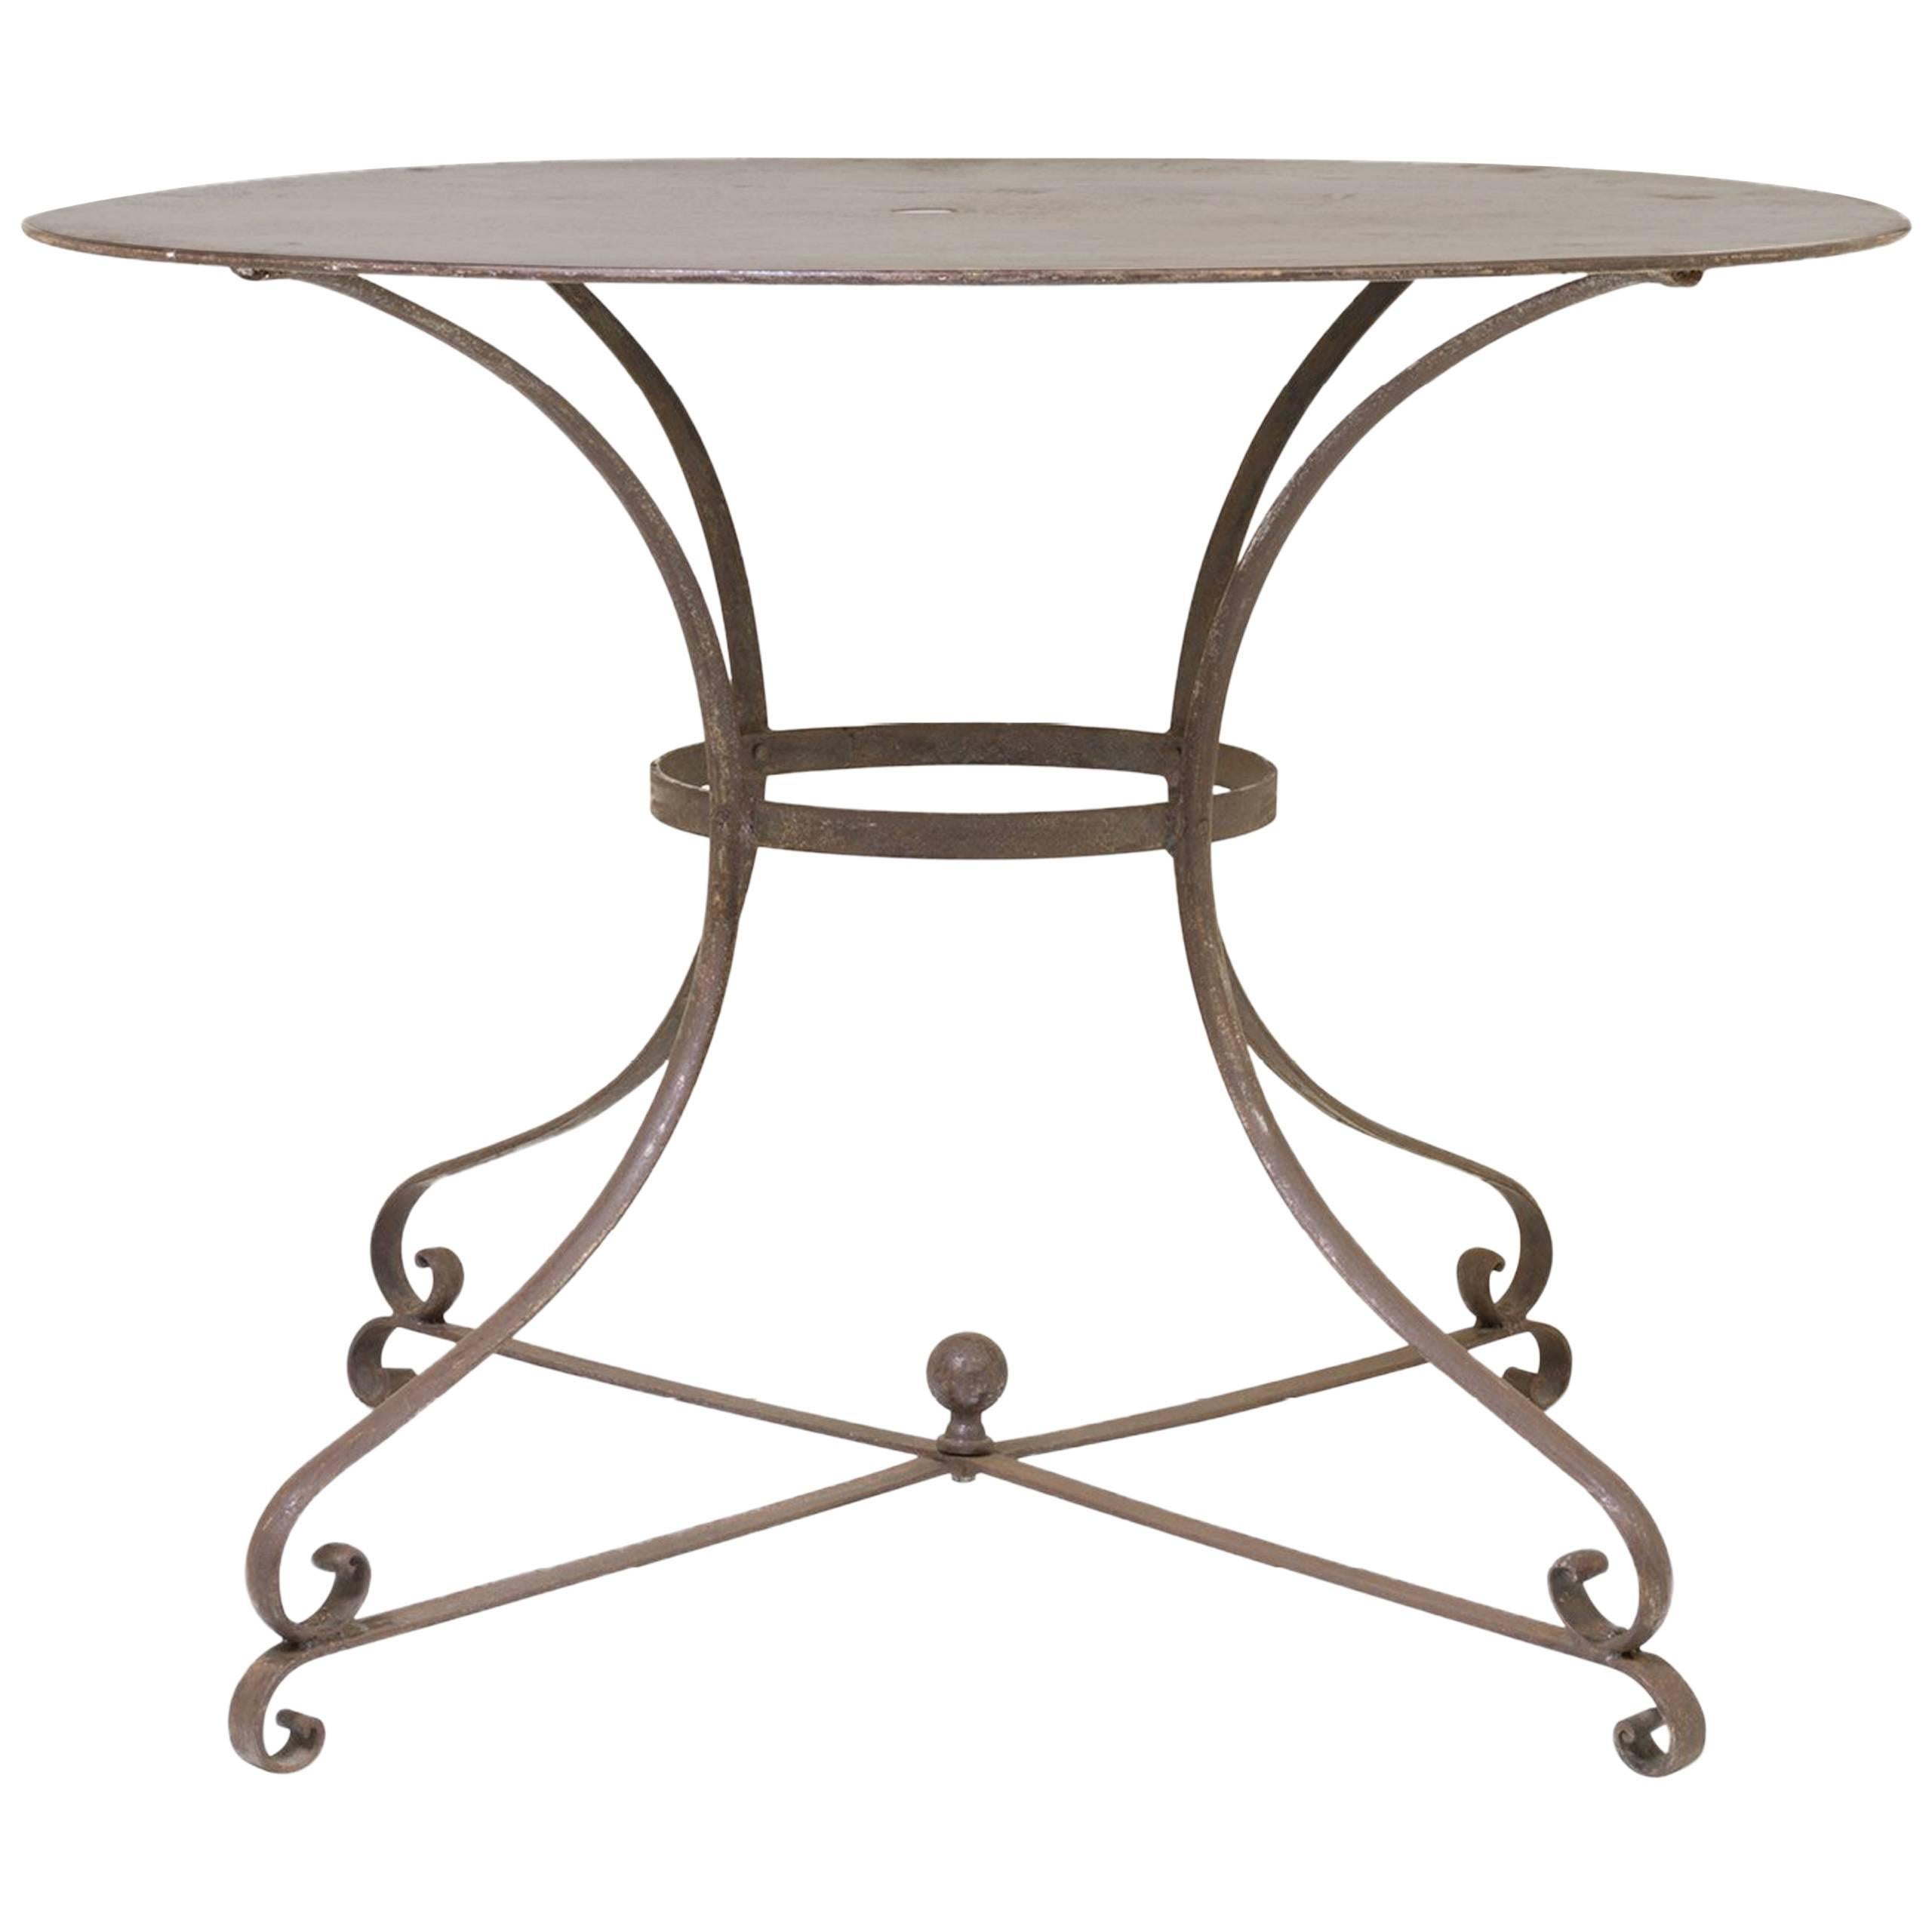 French Hammered Iron Guéridon Dining Table